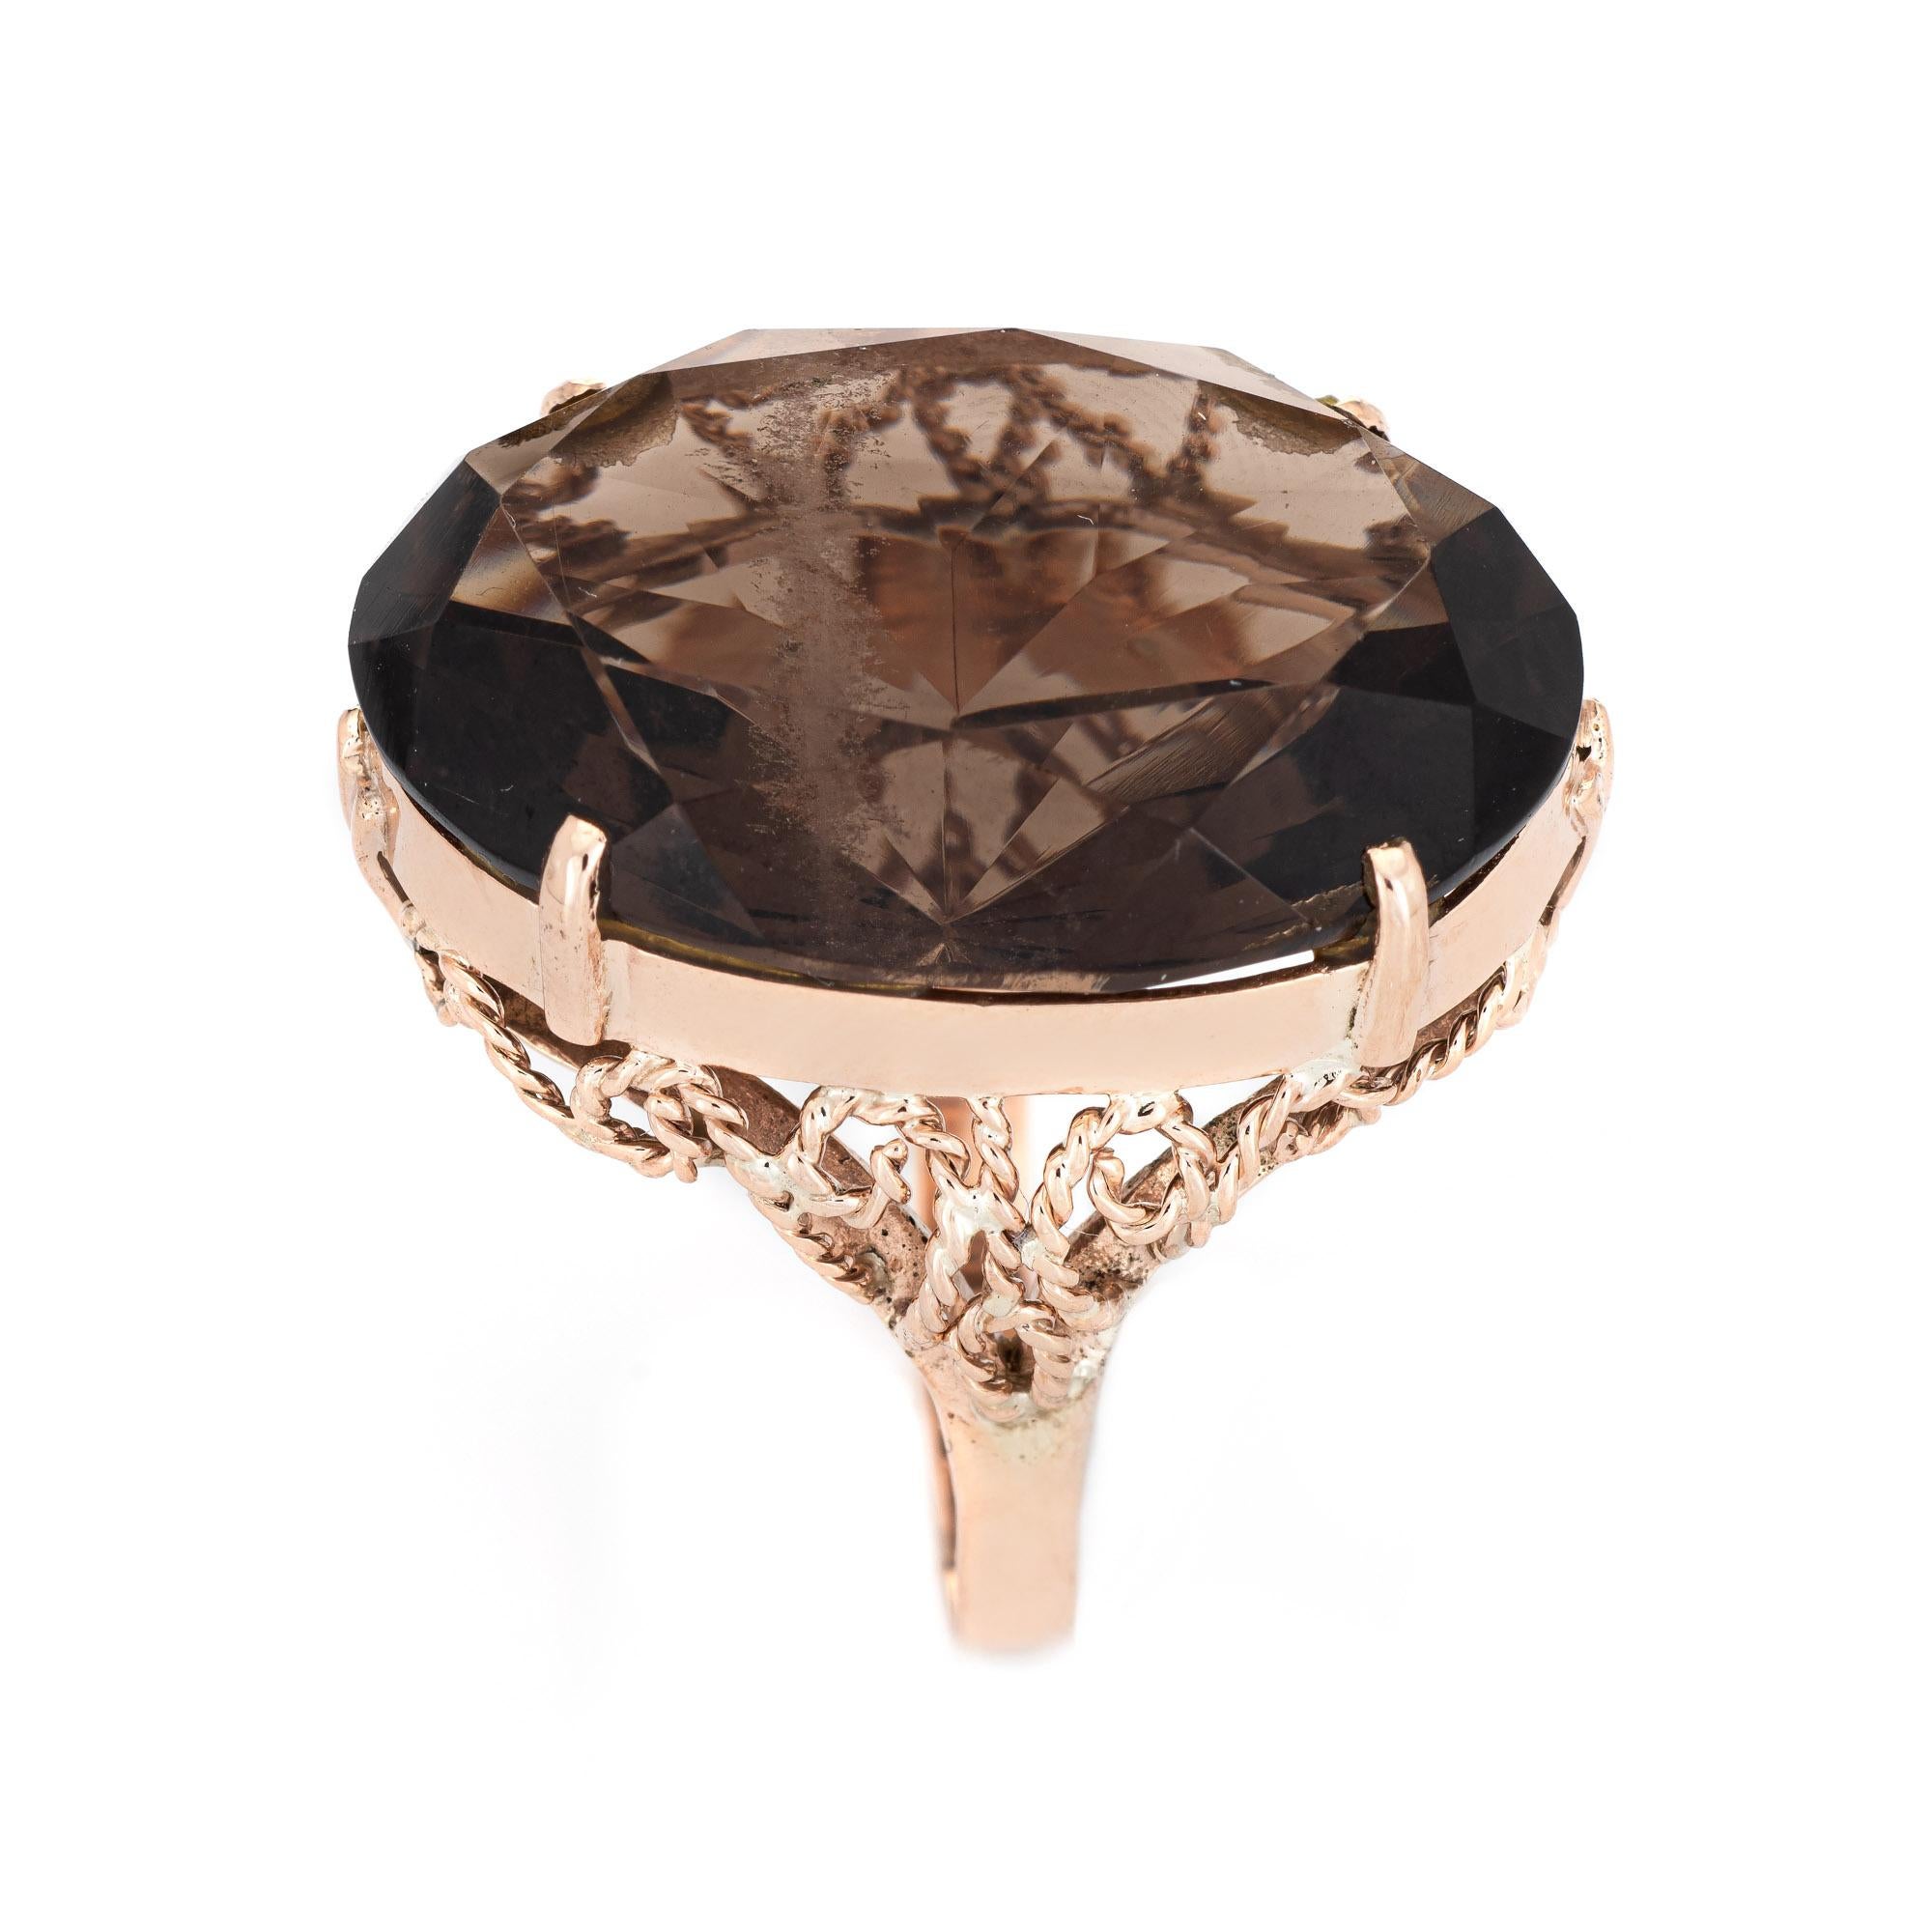 Stylish vintage estimated 35ct smoky quartz cocktail ring (circa 1950s to 1960s) crafted in 14 karat rose gold. 

Oval faceted smoky quartz measures 27mm x 20mm (estimated at 35 carats). The quartz is in excellent condition and free of cracks or